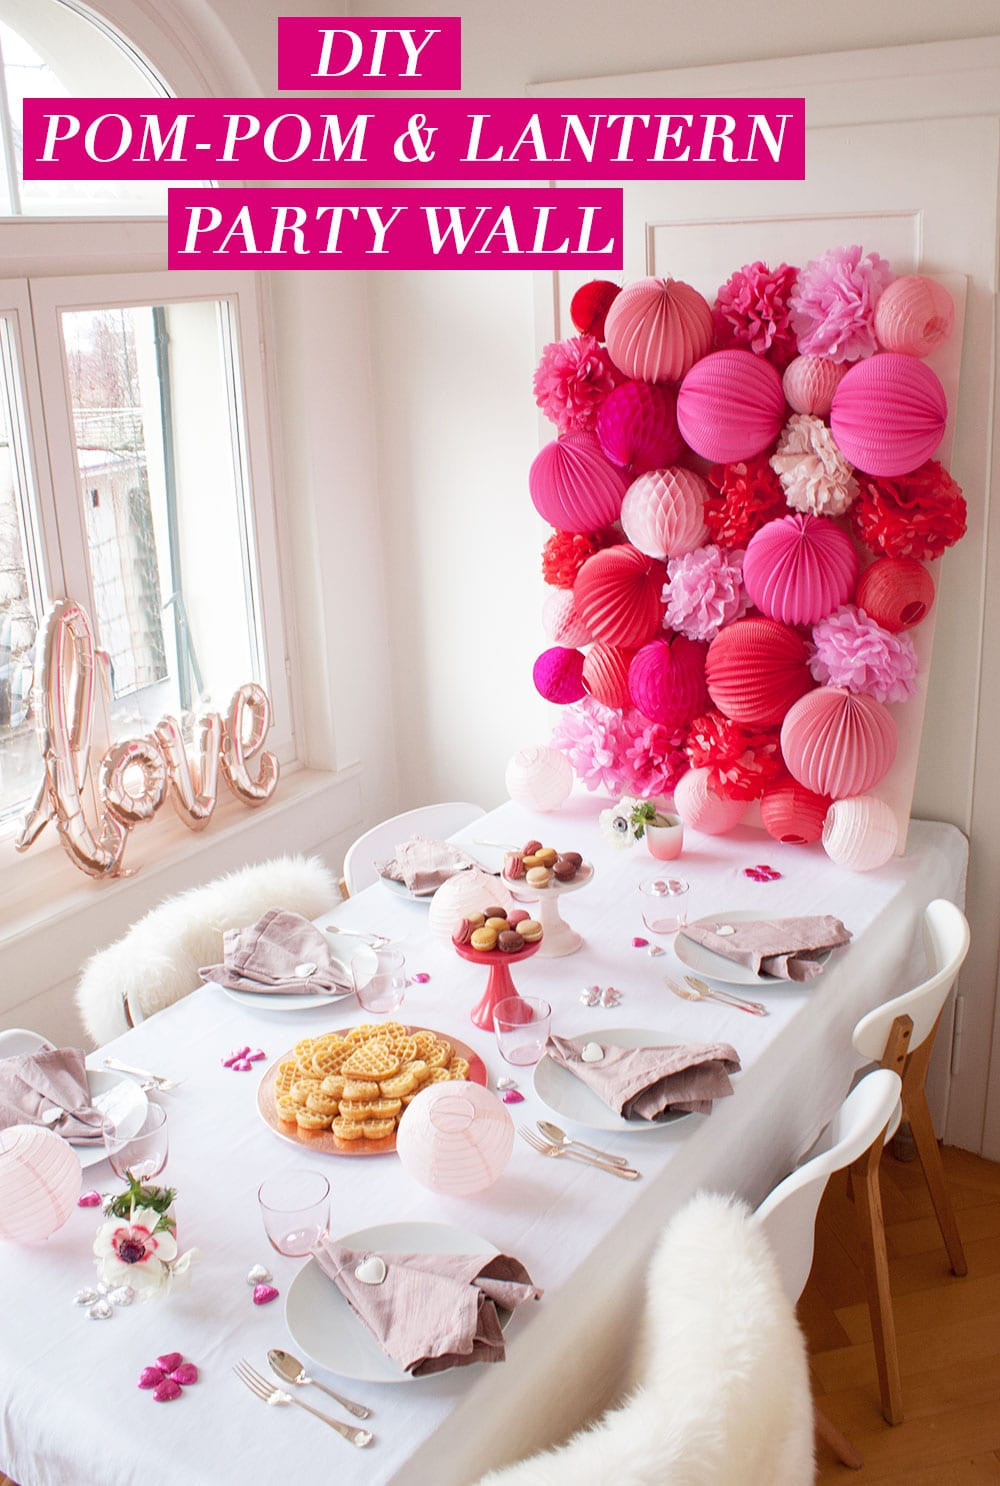 DIY Birthday Decorations
 DIY Pink and Red Valentine s Party Wall